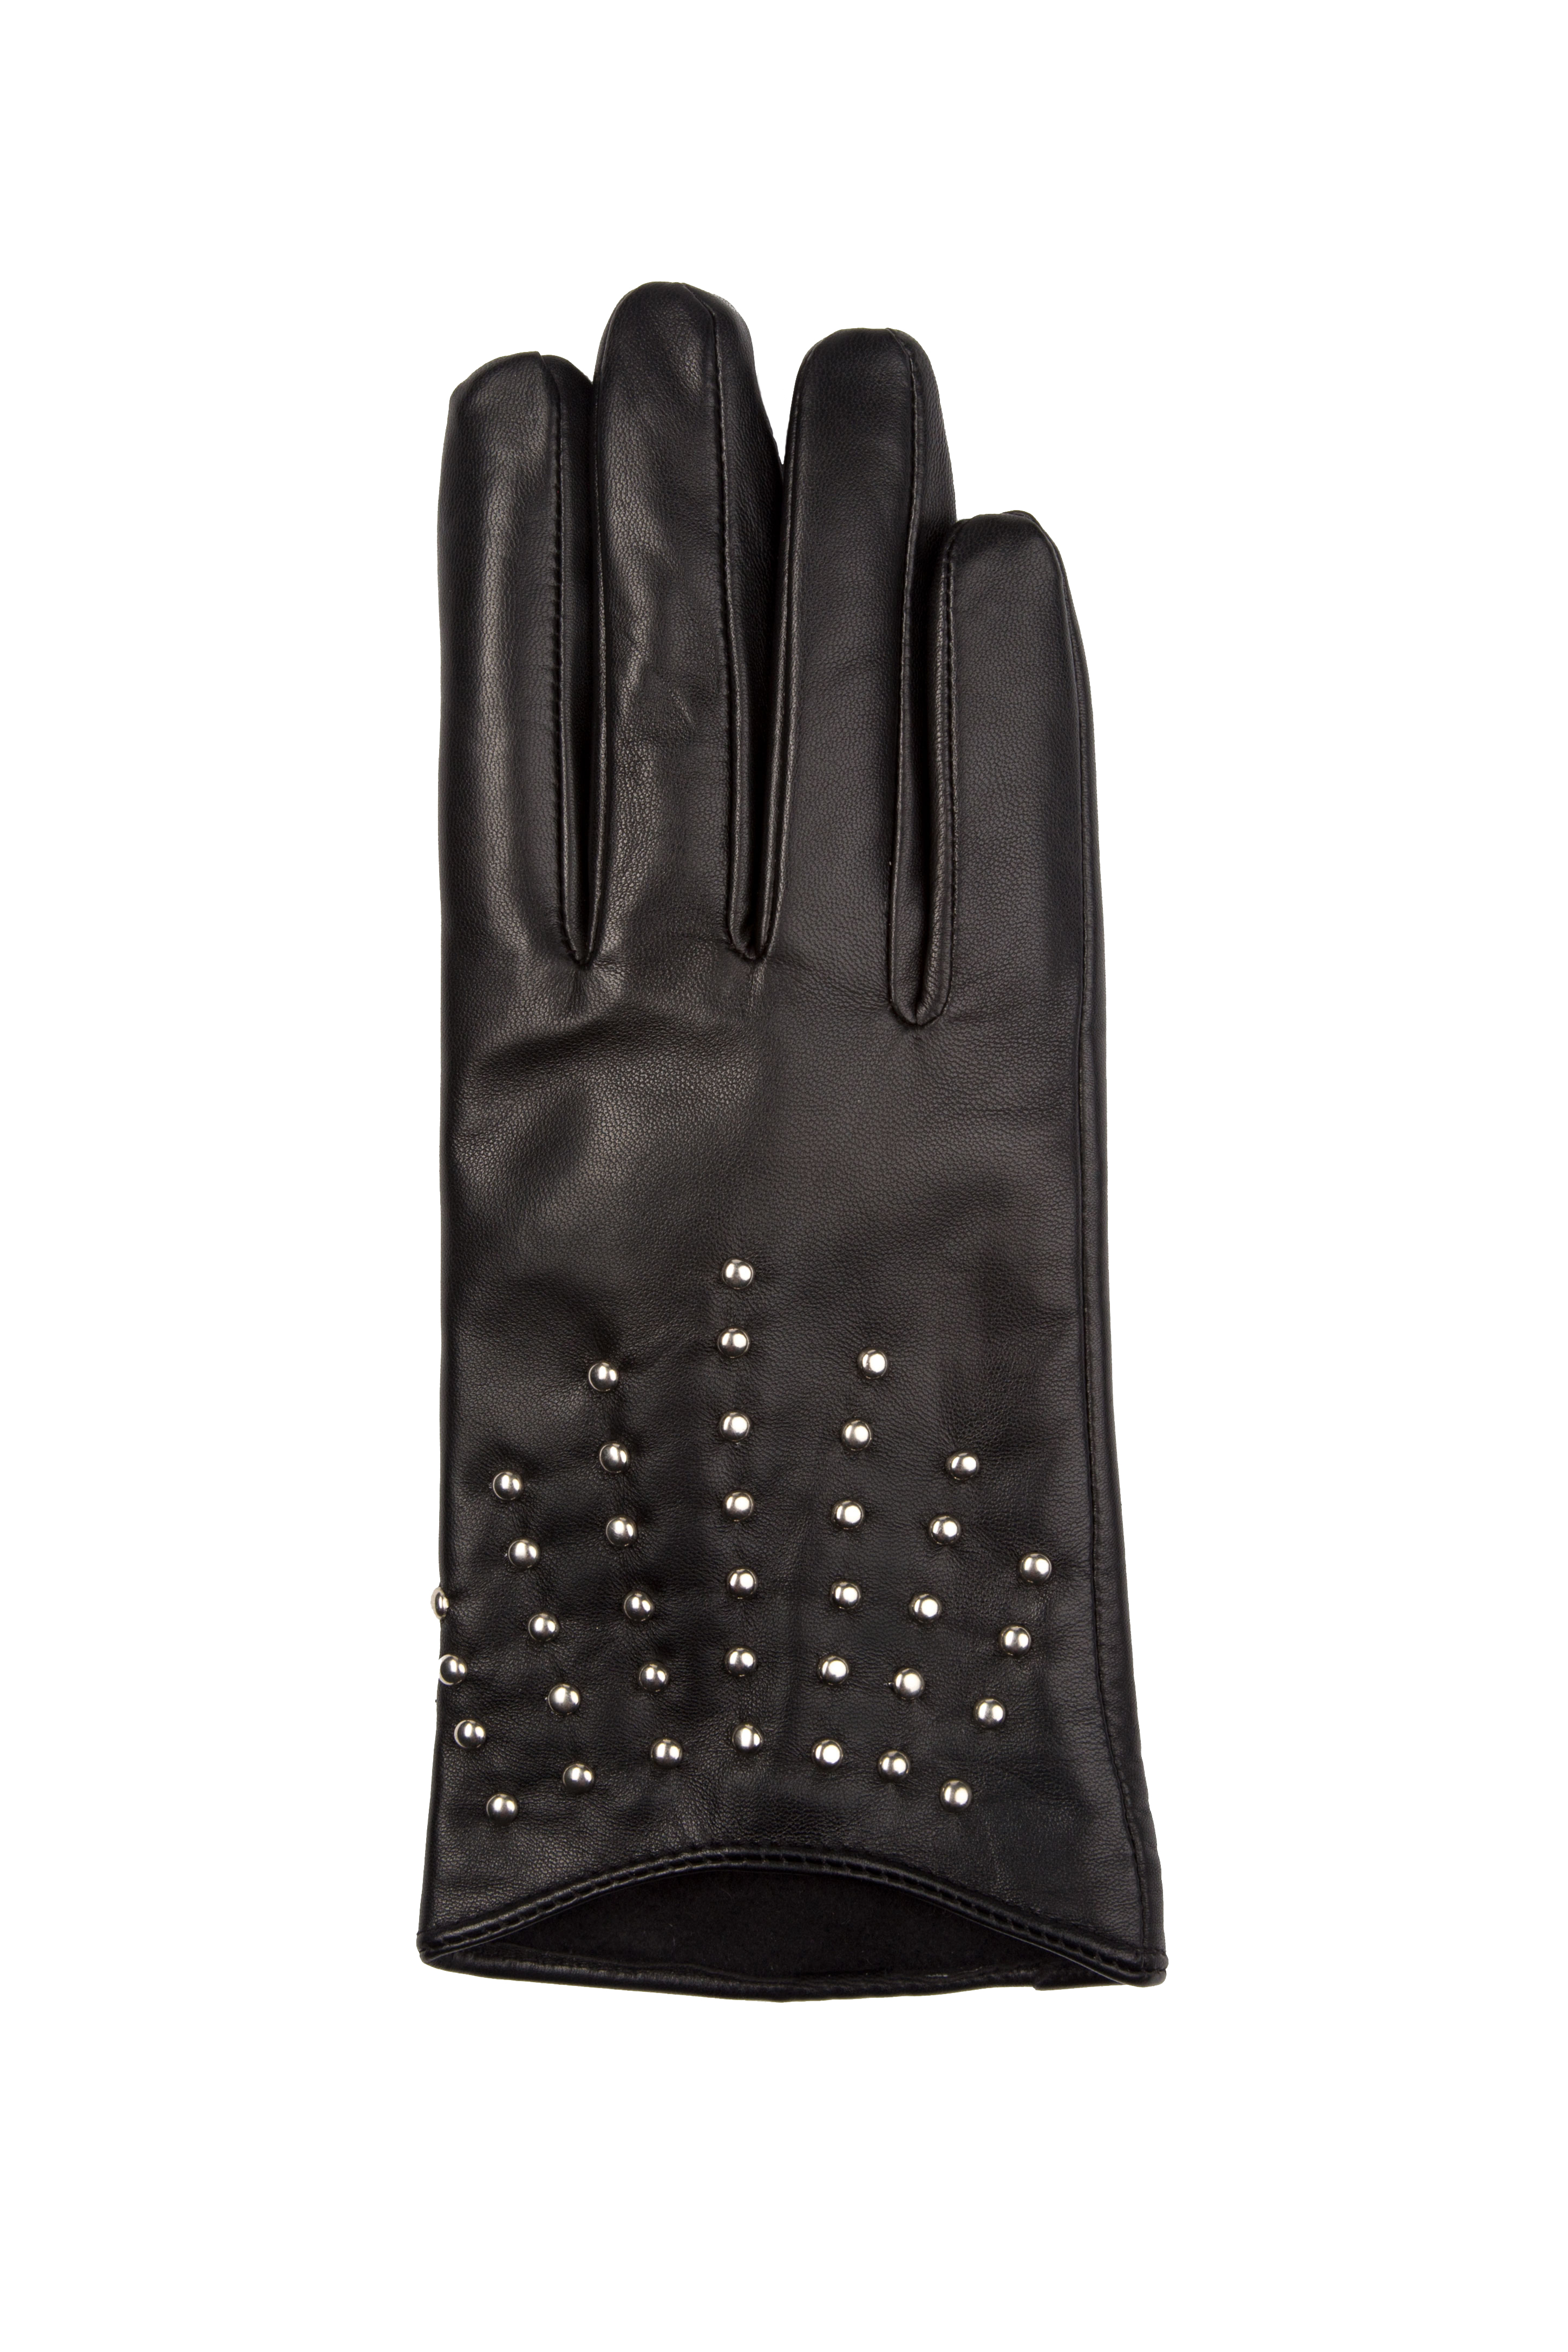 The Attitudes – Women’s Leather Dress Gloves with Long Fingers ...